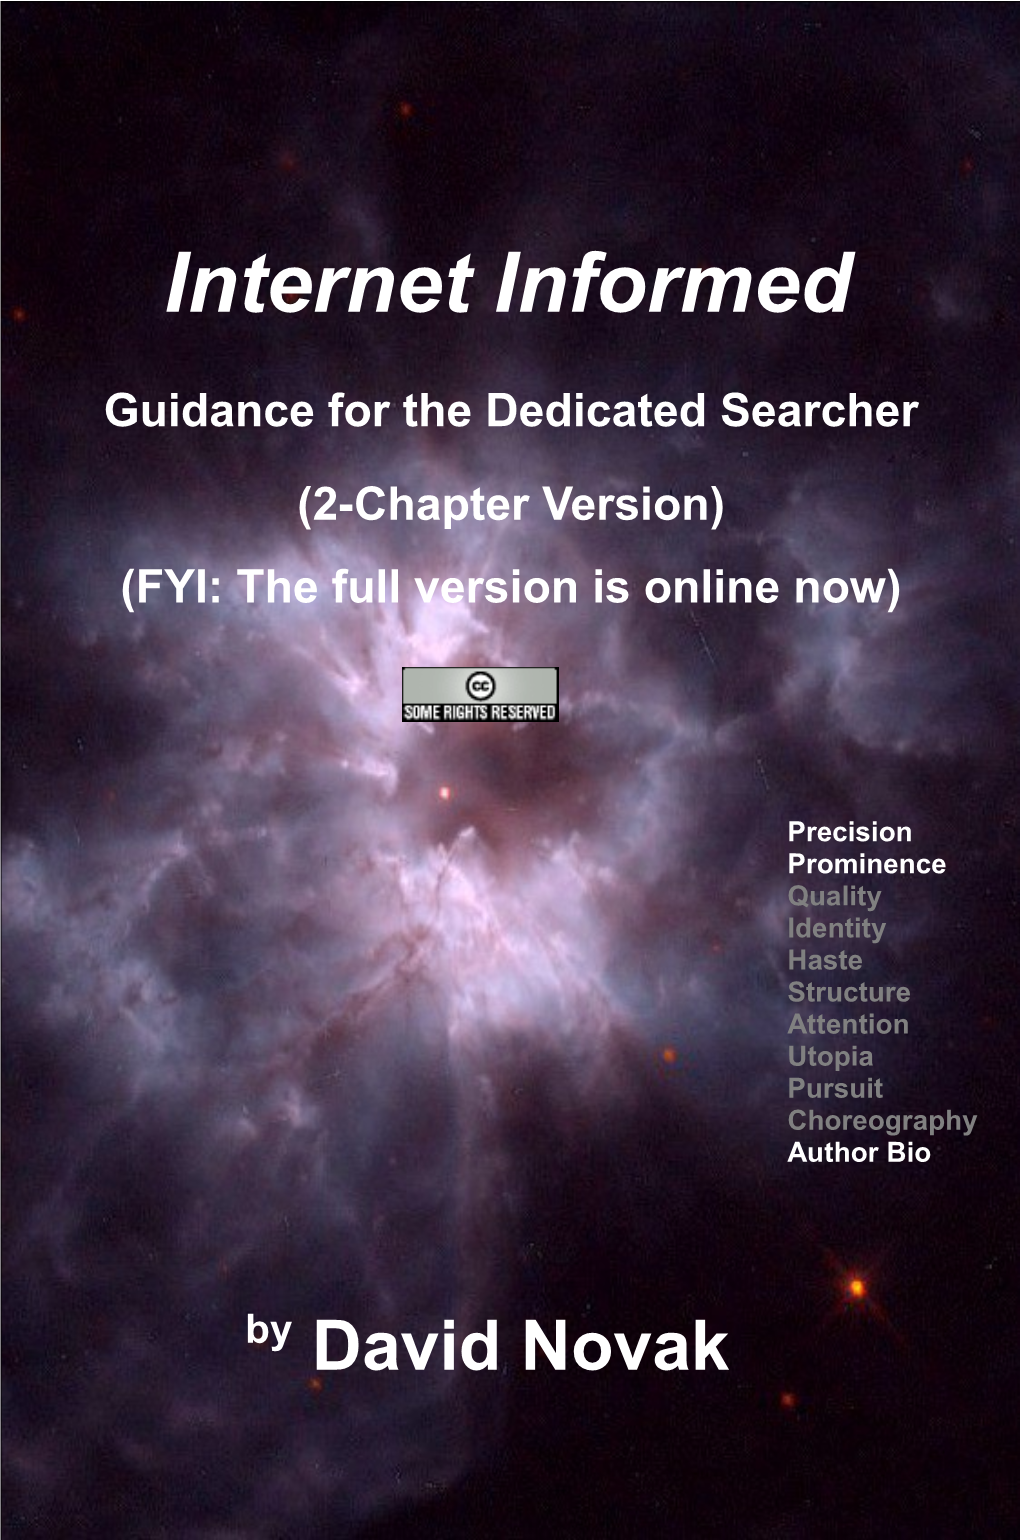 Internet Informed - Guidance for the Dedicated Searcher